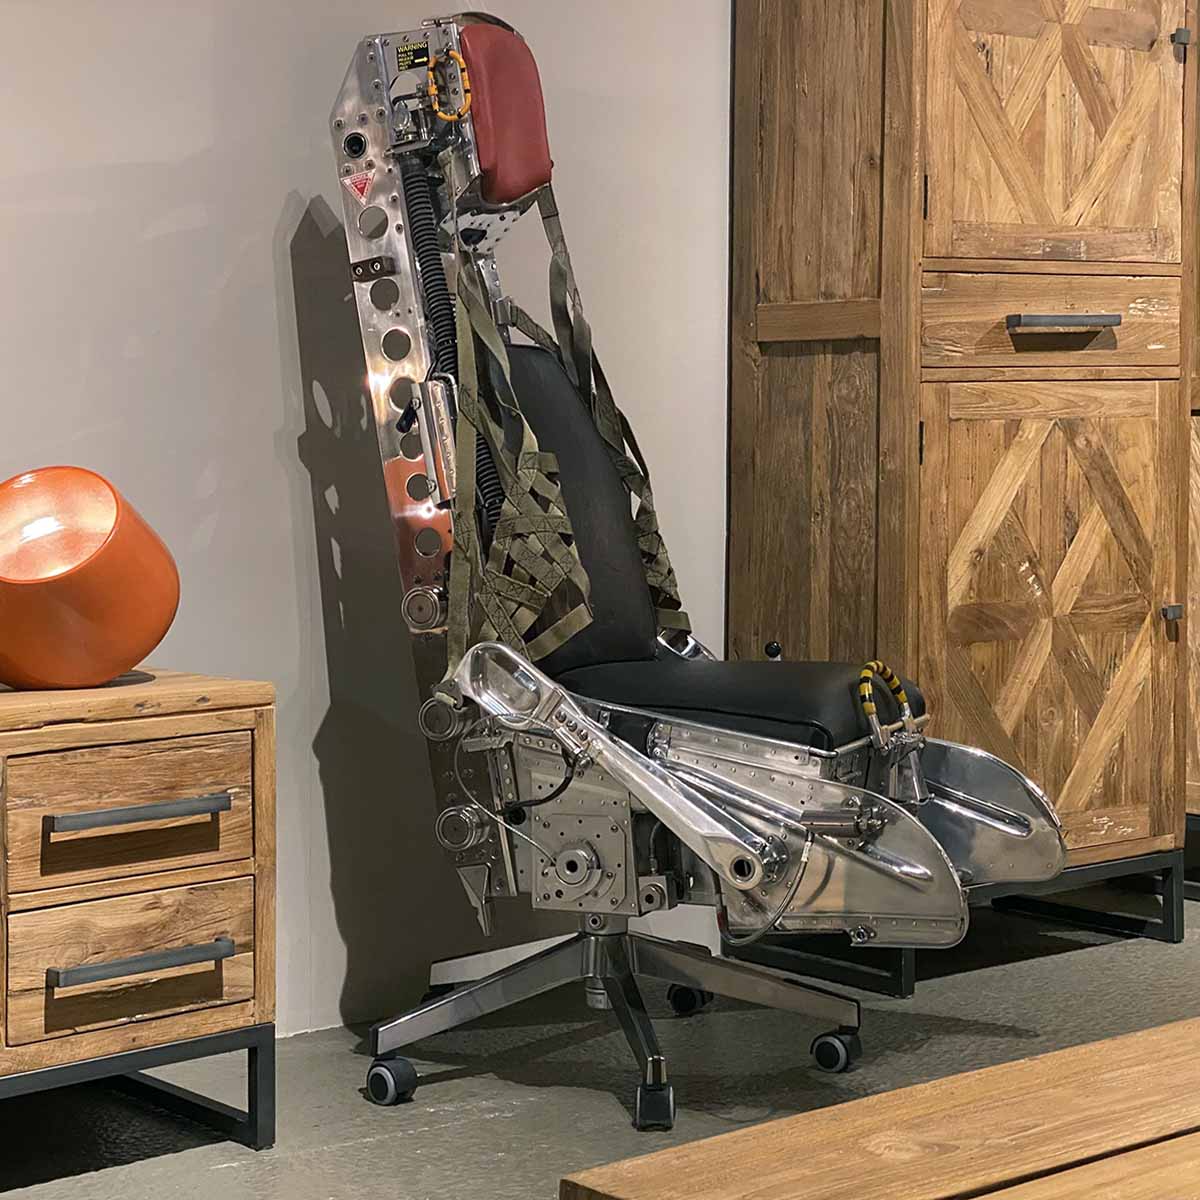 Office chair made of a polished Lockheed C2 ejection seat as a decorative piece.